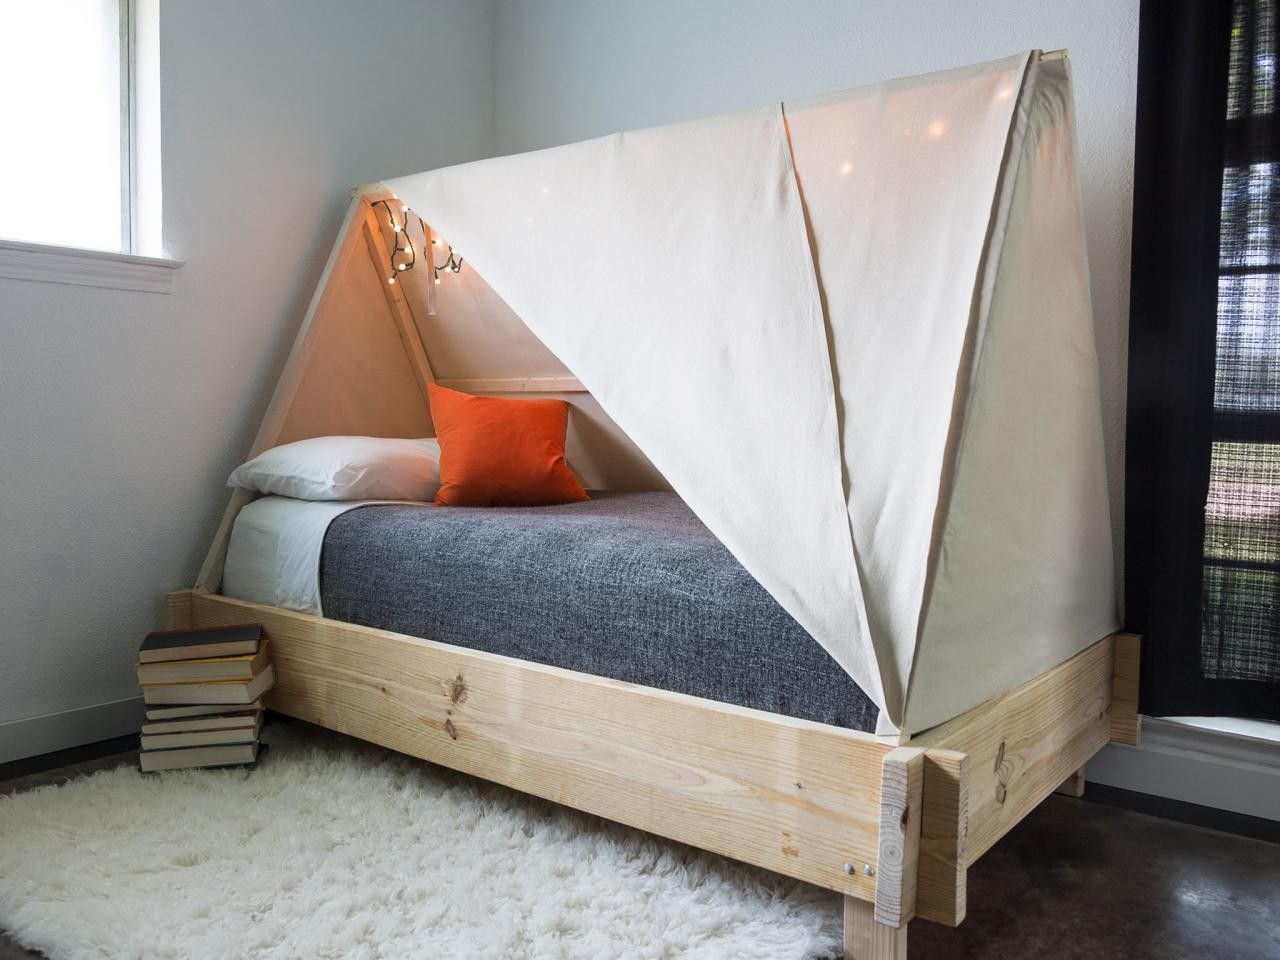 Cozy tent bed Best DIY Ideas As Solutions To All Your Boys Room Décor Dilemmas